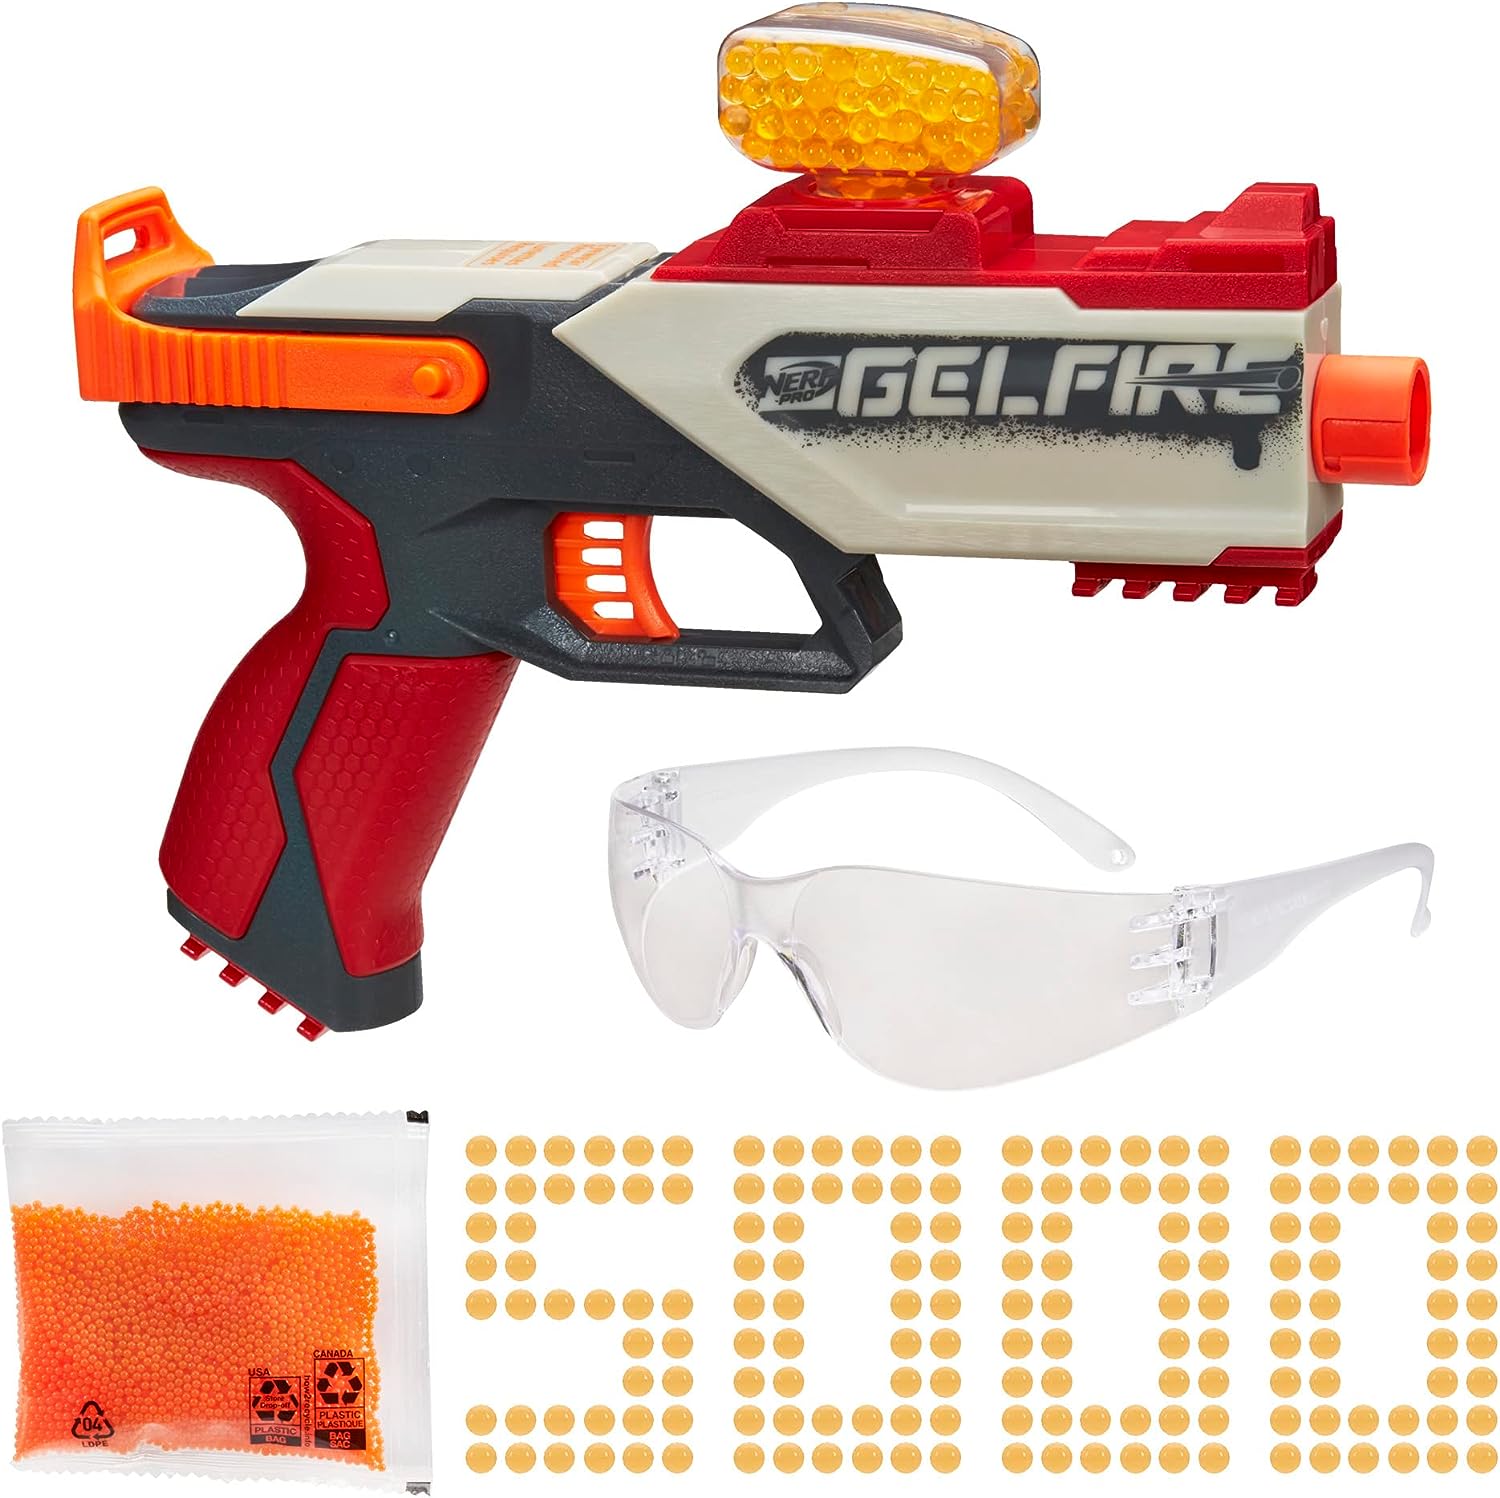 Nerf Pro Gelfire orbeez guncomes with 5000 rounds of gel ammunition